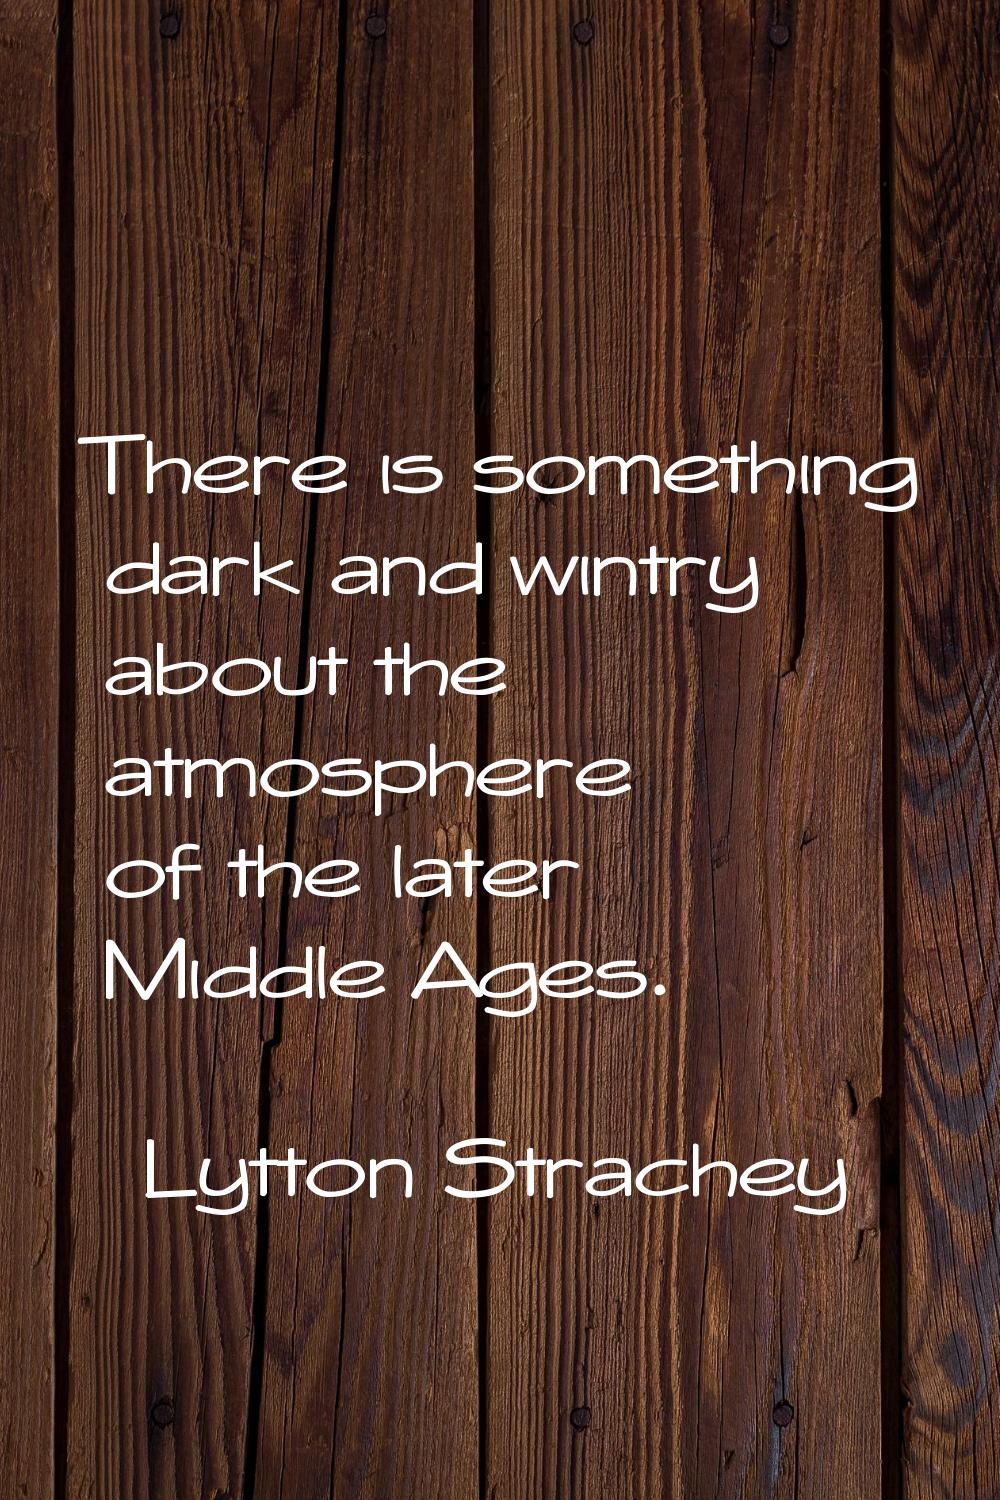 There is something dark and wintry about the atmosphere of the later Middle Ages.